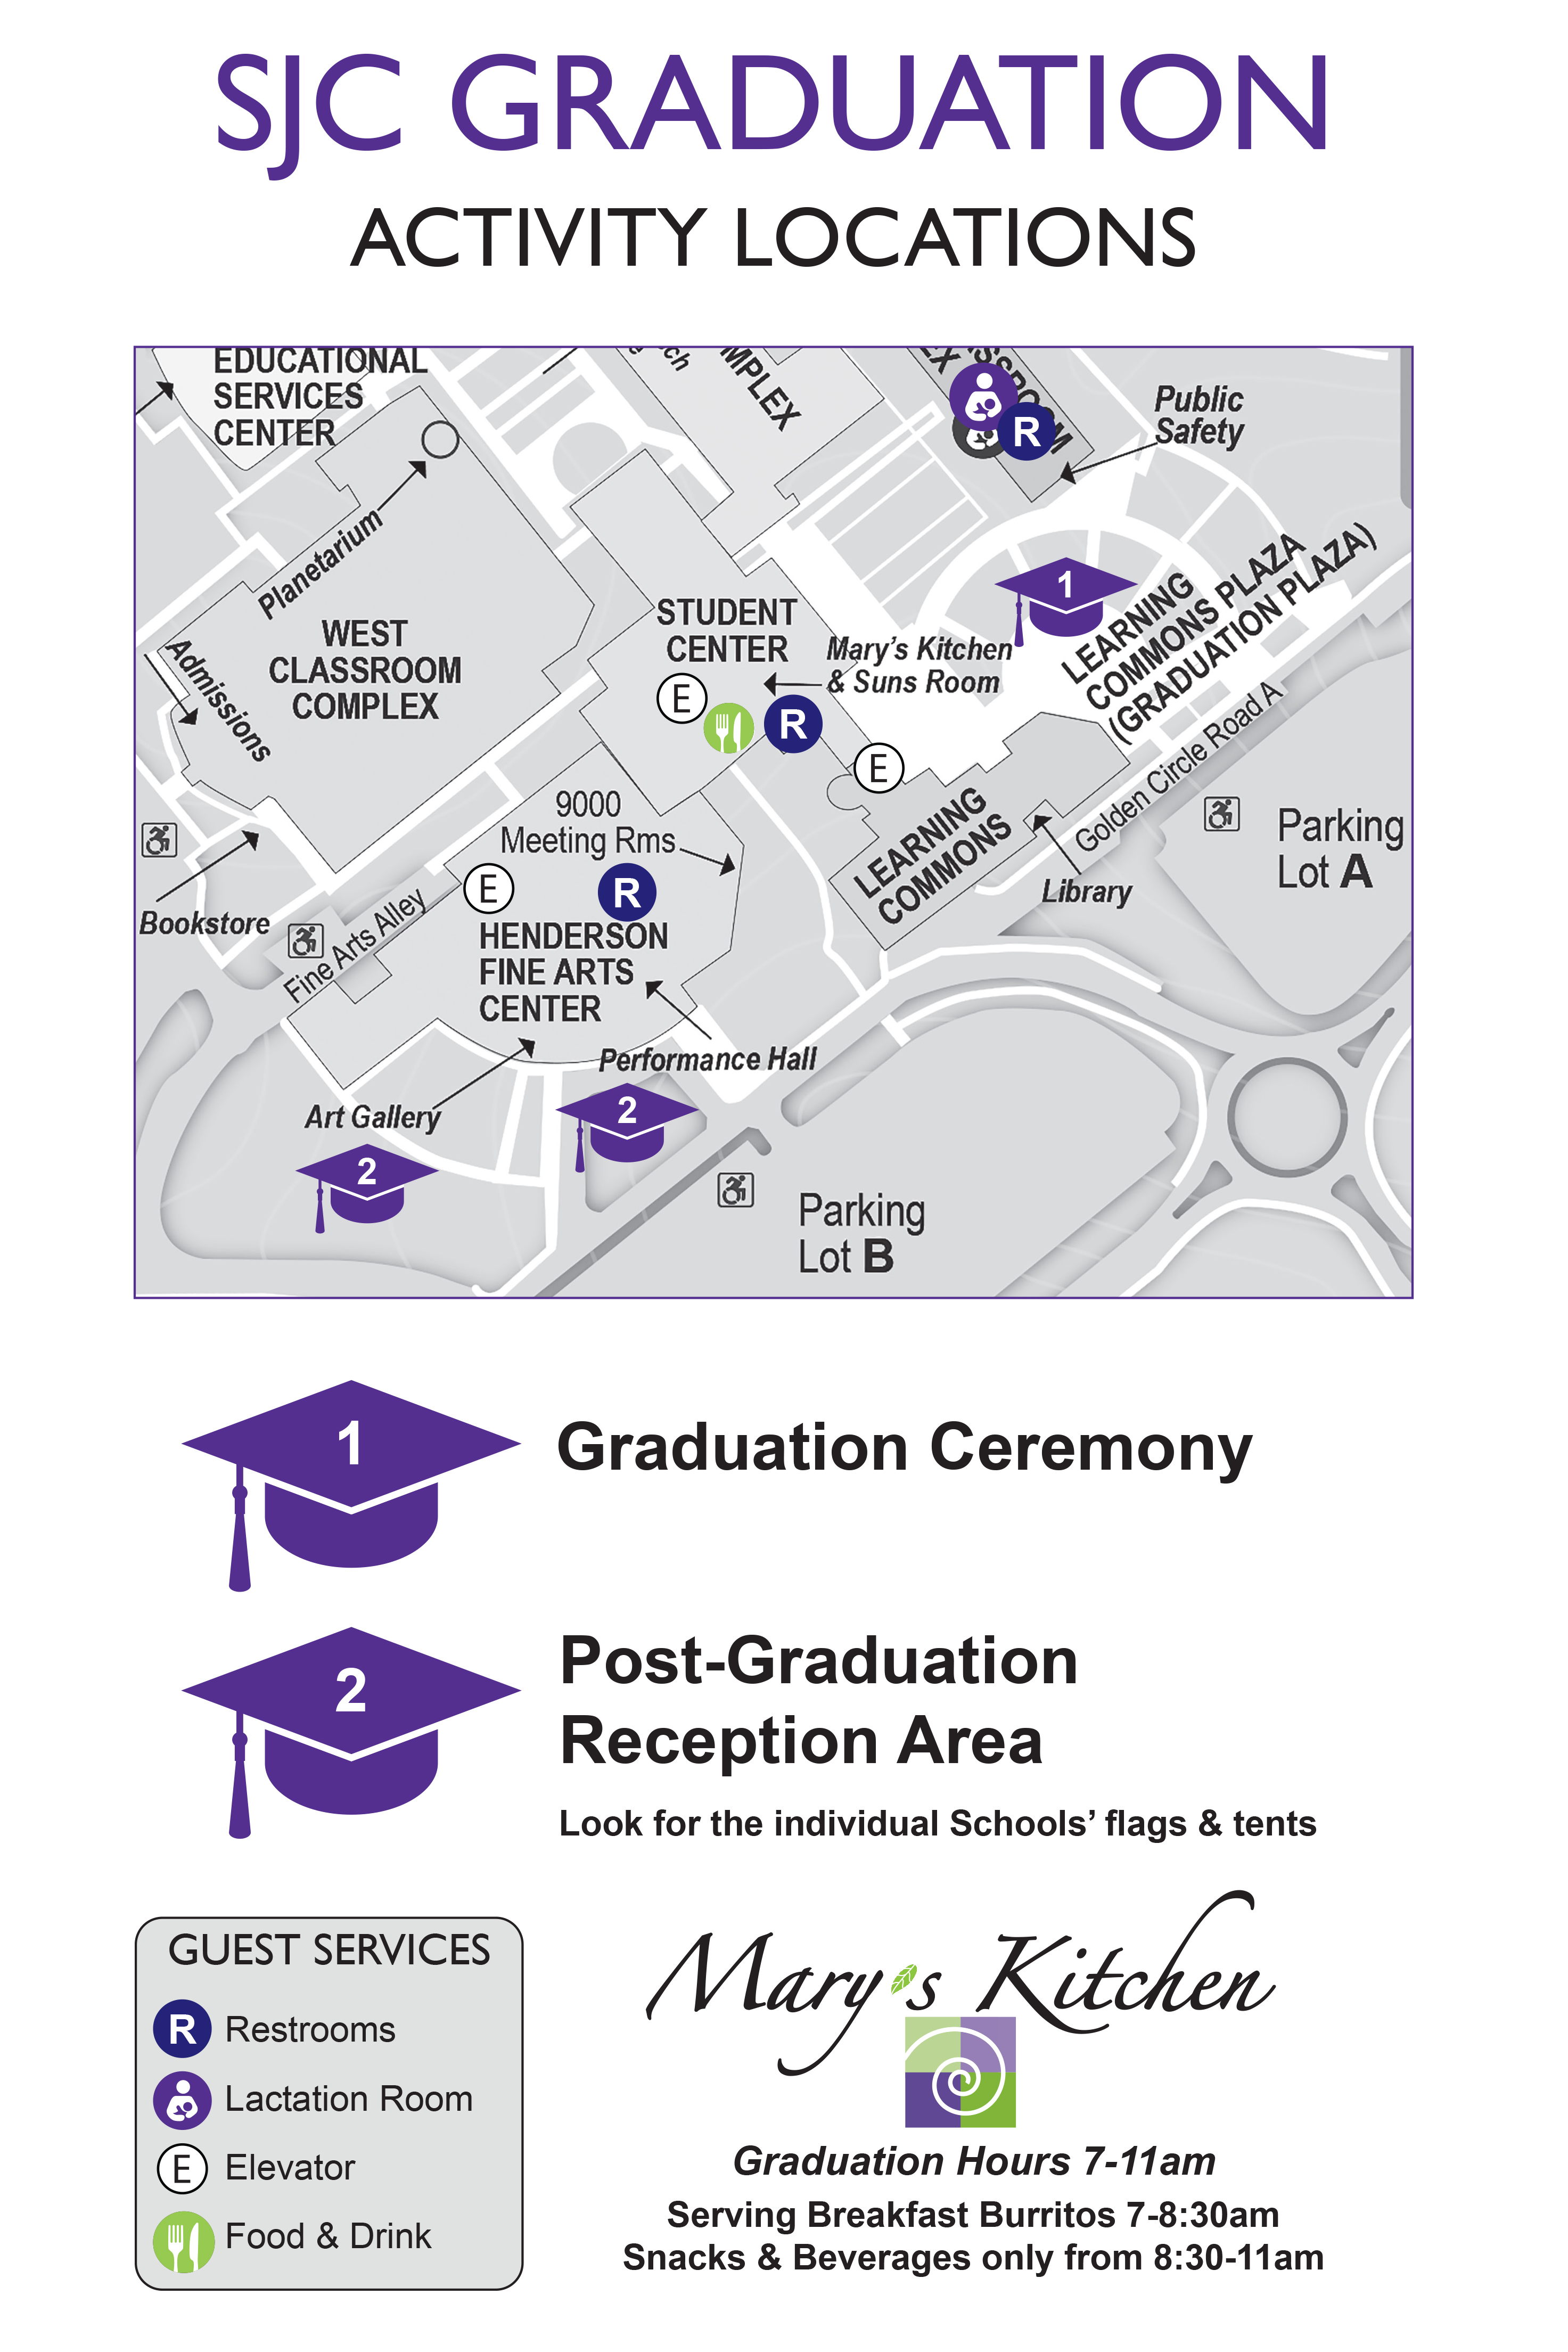 SJC Graduation Activity Locations, map of campus. 1 grad cap location for the graduation Ceremony. #2 Grad Cap Post-Graduation Reception Area look for the individual schools' flags & tents. Guest Services- Restrooms, Lactation Room, Elevator, Food & Drink. Mary's Kitchen Graduation Hours 7-11am Serving Breakfast Burritos 7-8:30am Snacks & Beverages only from 8:30-11am